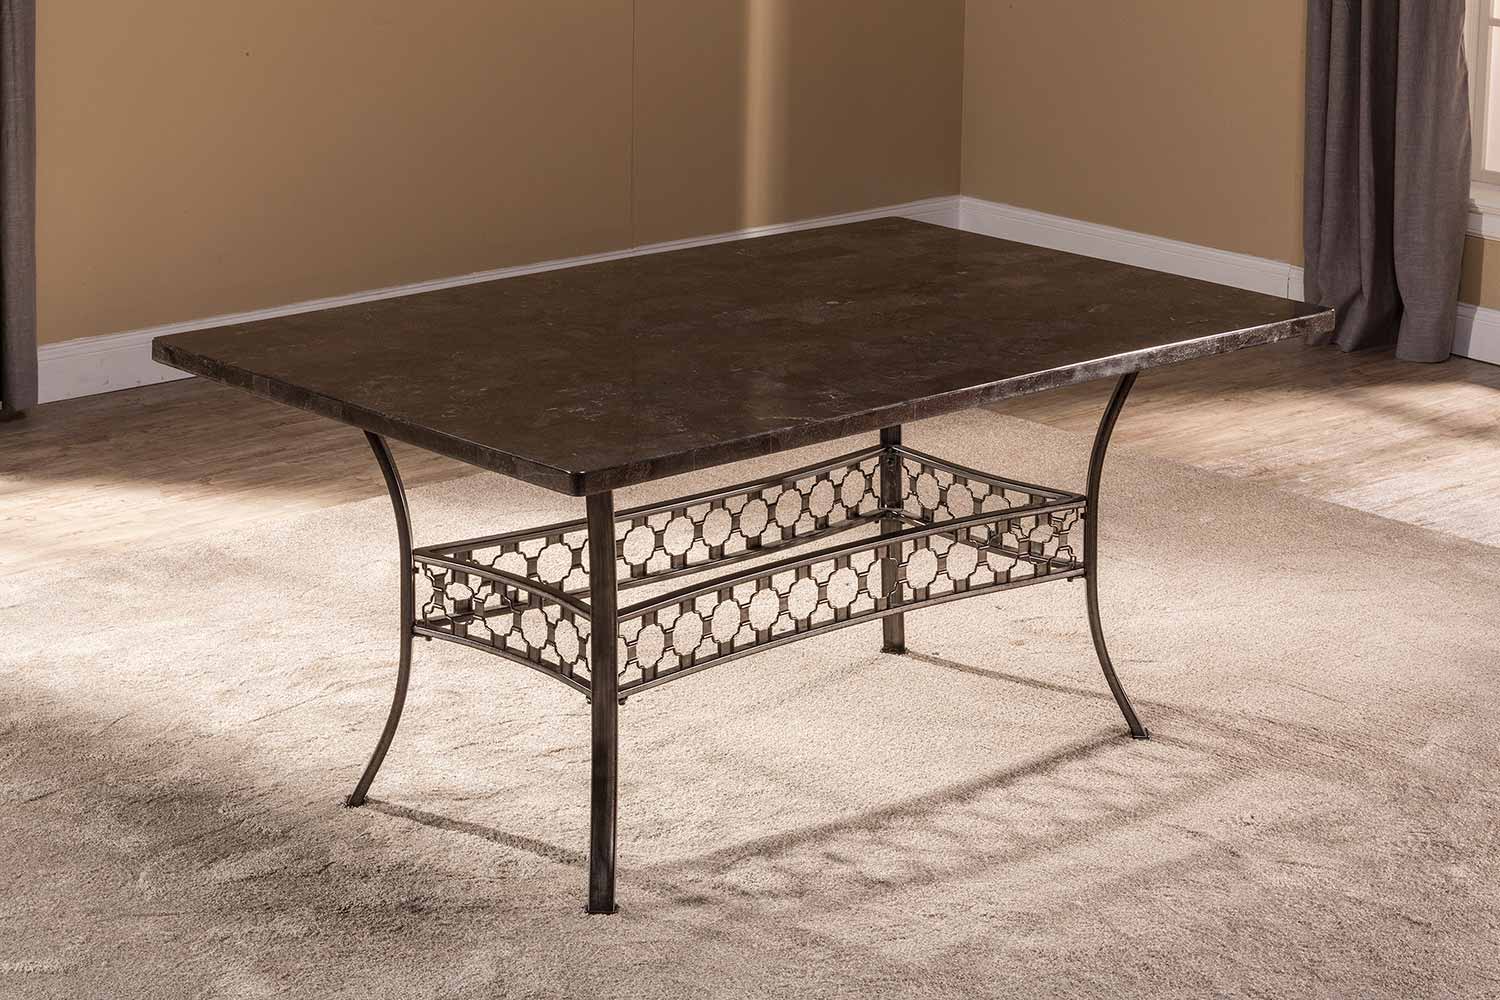 Hillsdale Brescello Rectangle Dining Table - Charcoal/Blue Stone